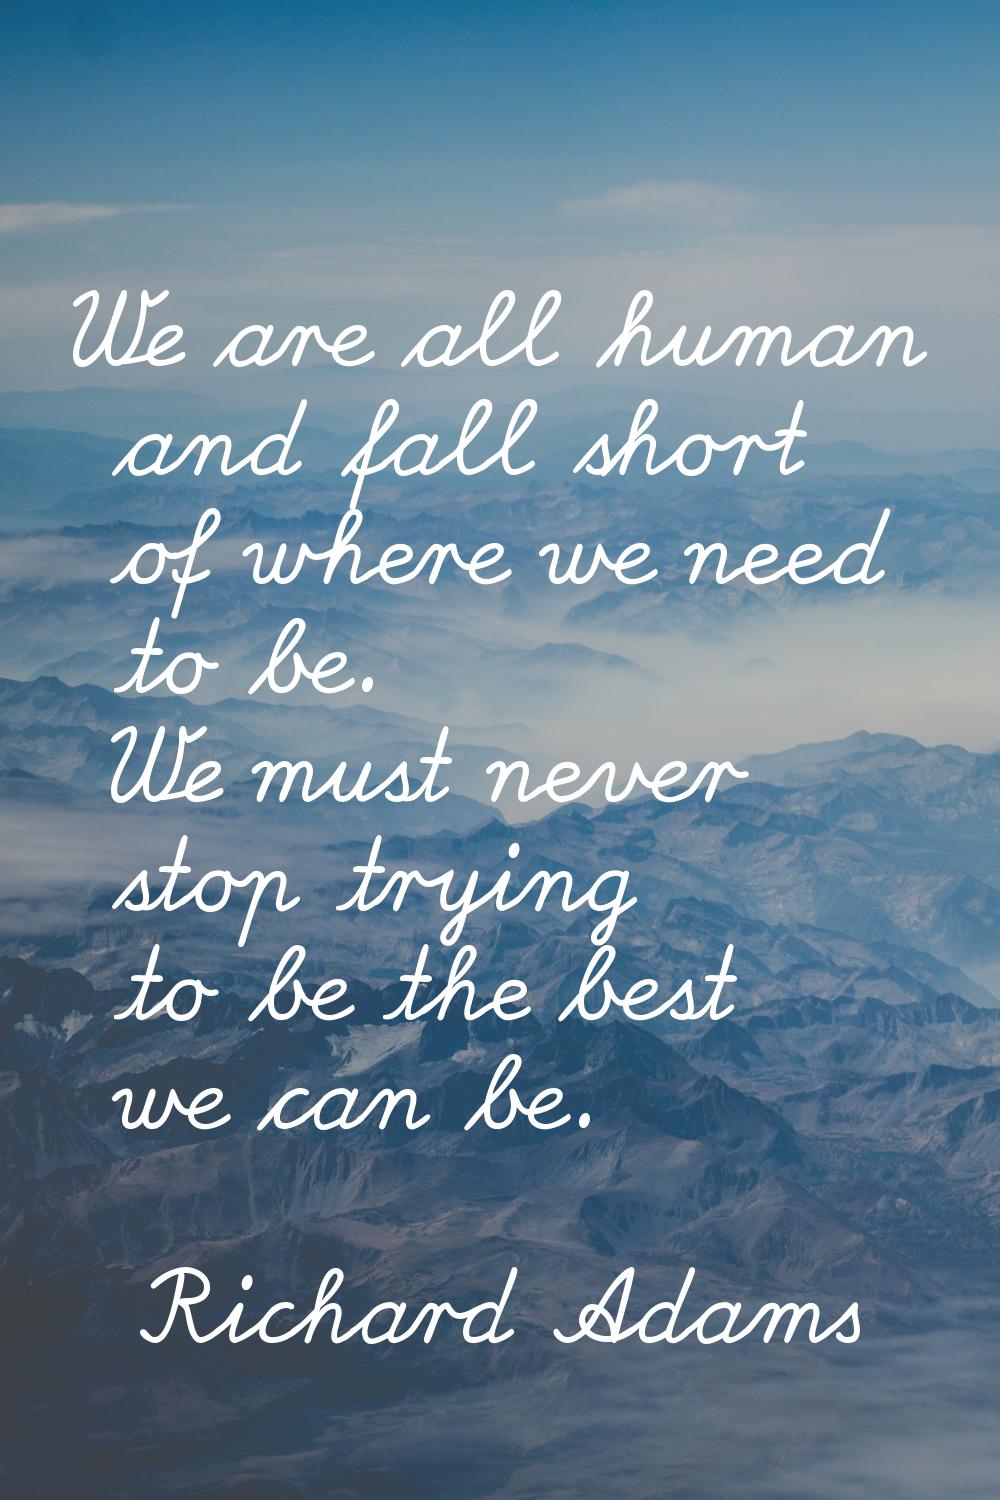 We are all human and fall short of where we need to be. We must never stop trying to be the best we